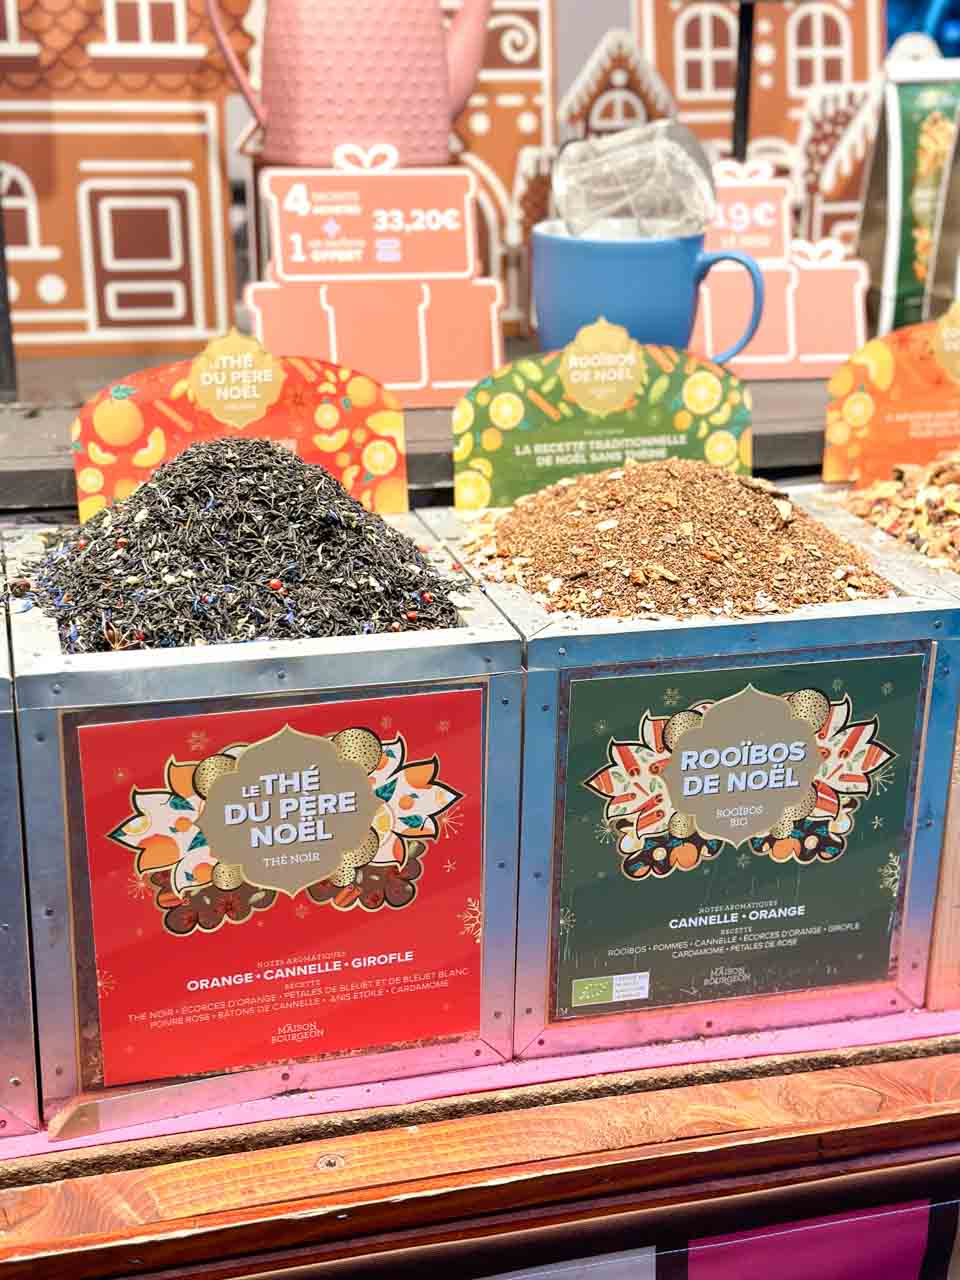 Heaps of Christmas tea displayed at a market stall at Place du Temple Neuf in Strasbourg, France